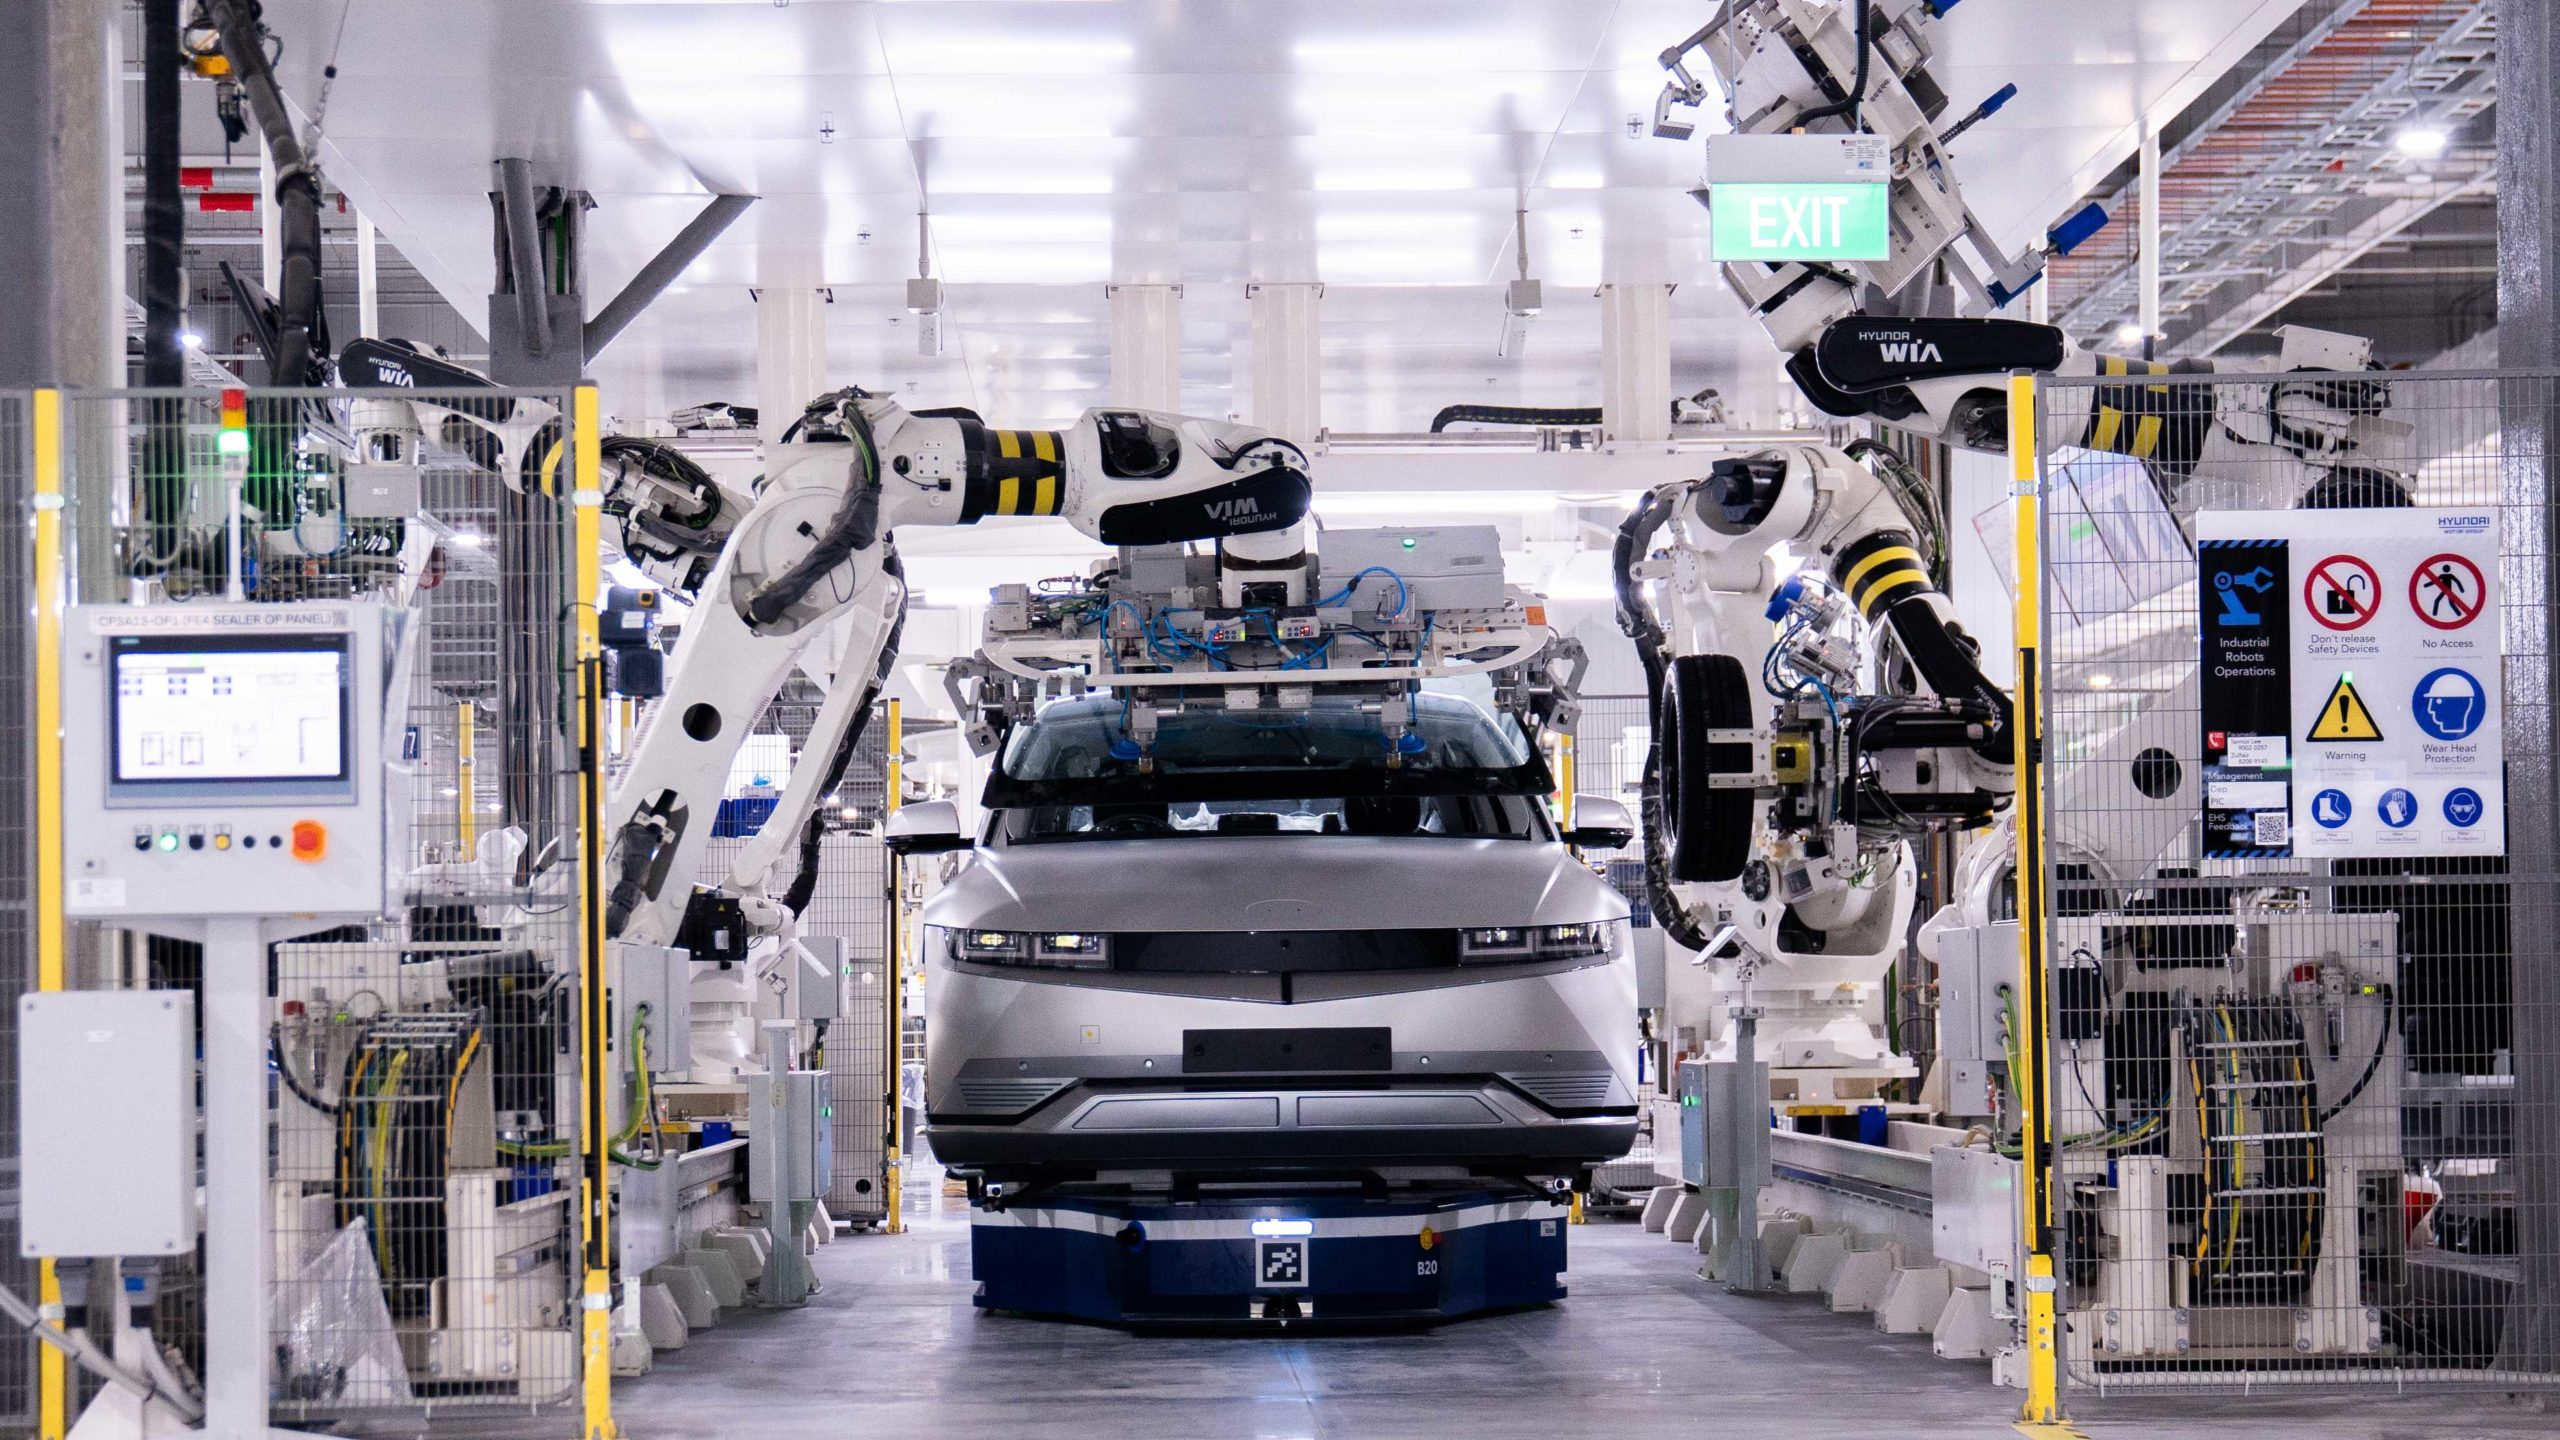 hyundai motor group innovation centre singapore in jurong is more than an ioniq 5 assembly plant, it is also an ambitious smart hub for urban mobility